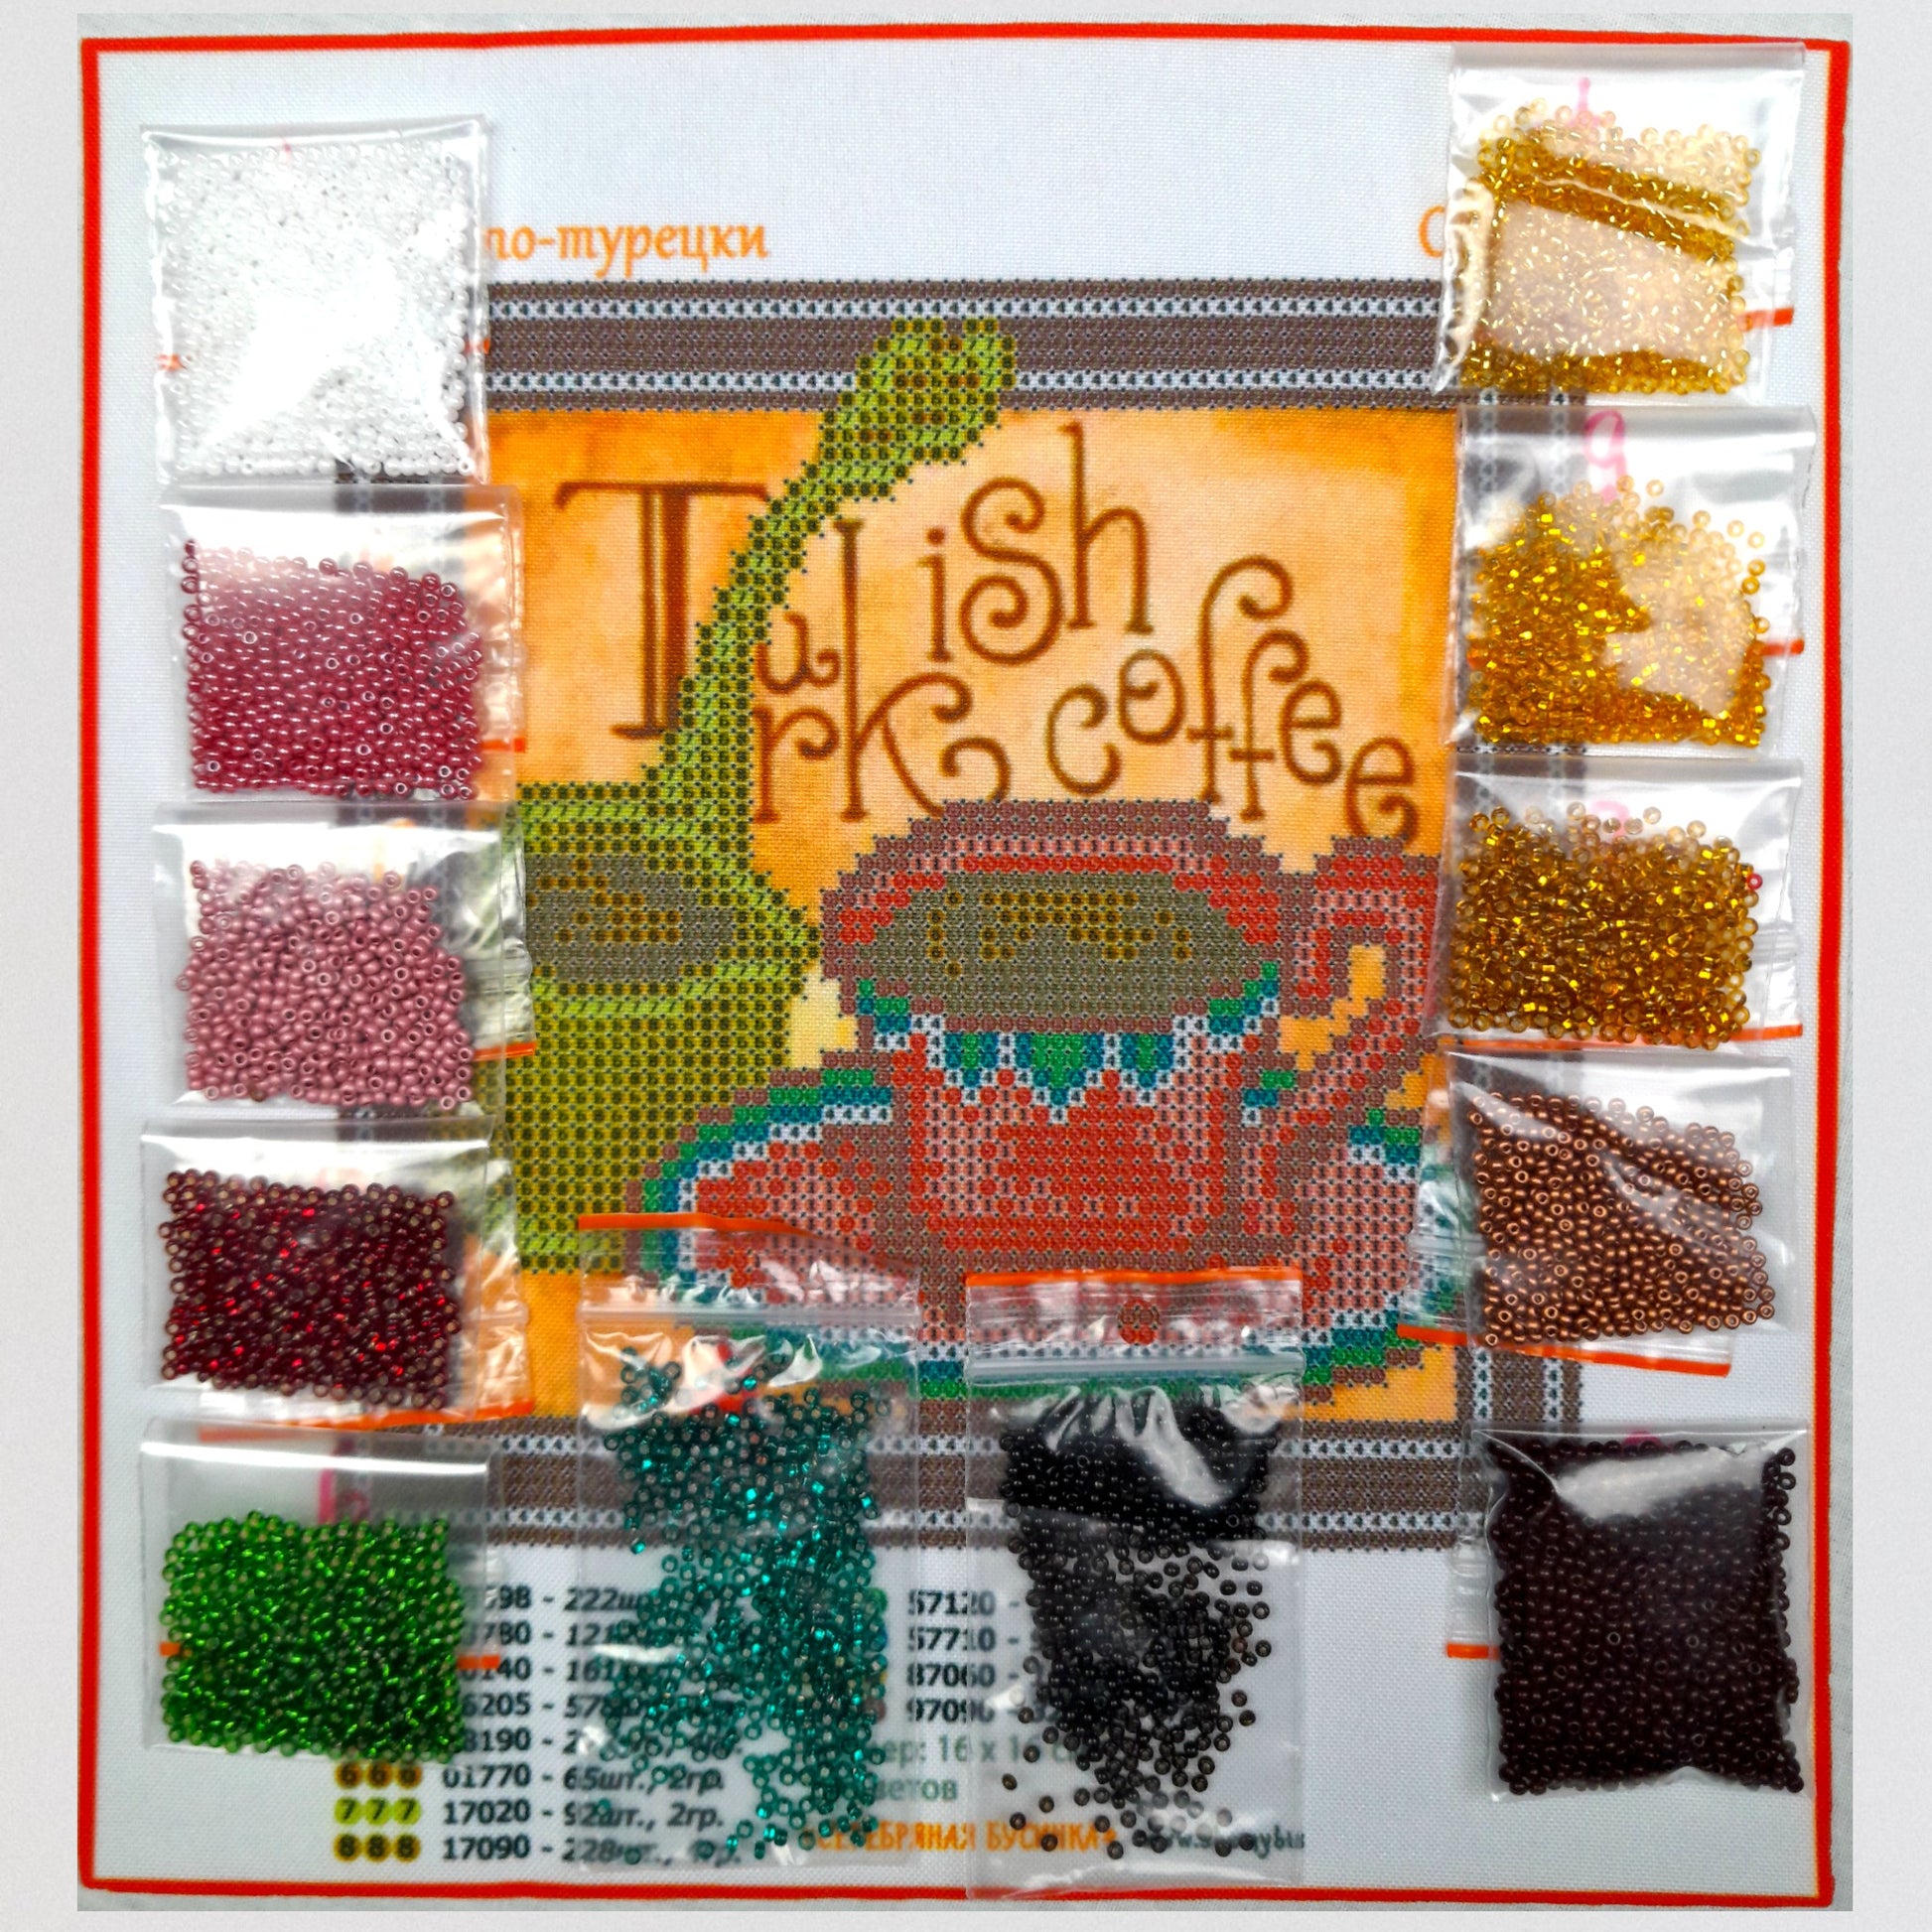 DIY Bead embroidery kit "Turkish coffee". size: 6.3 - 6.3in (16 - 16cm). - VadymShop